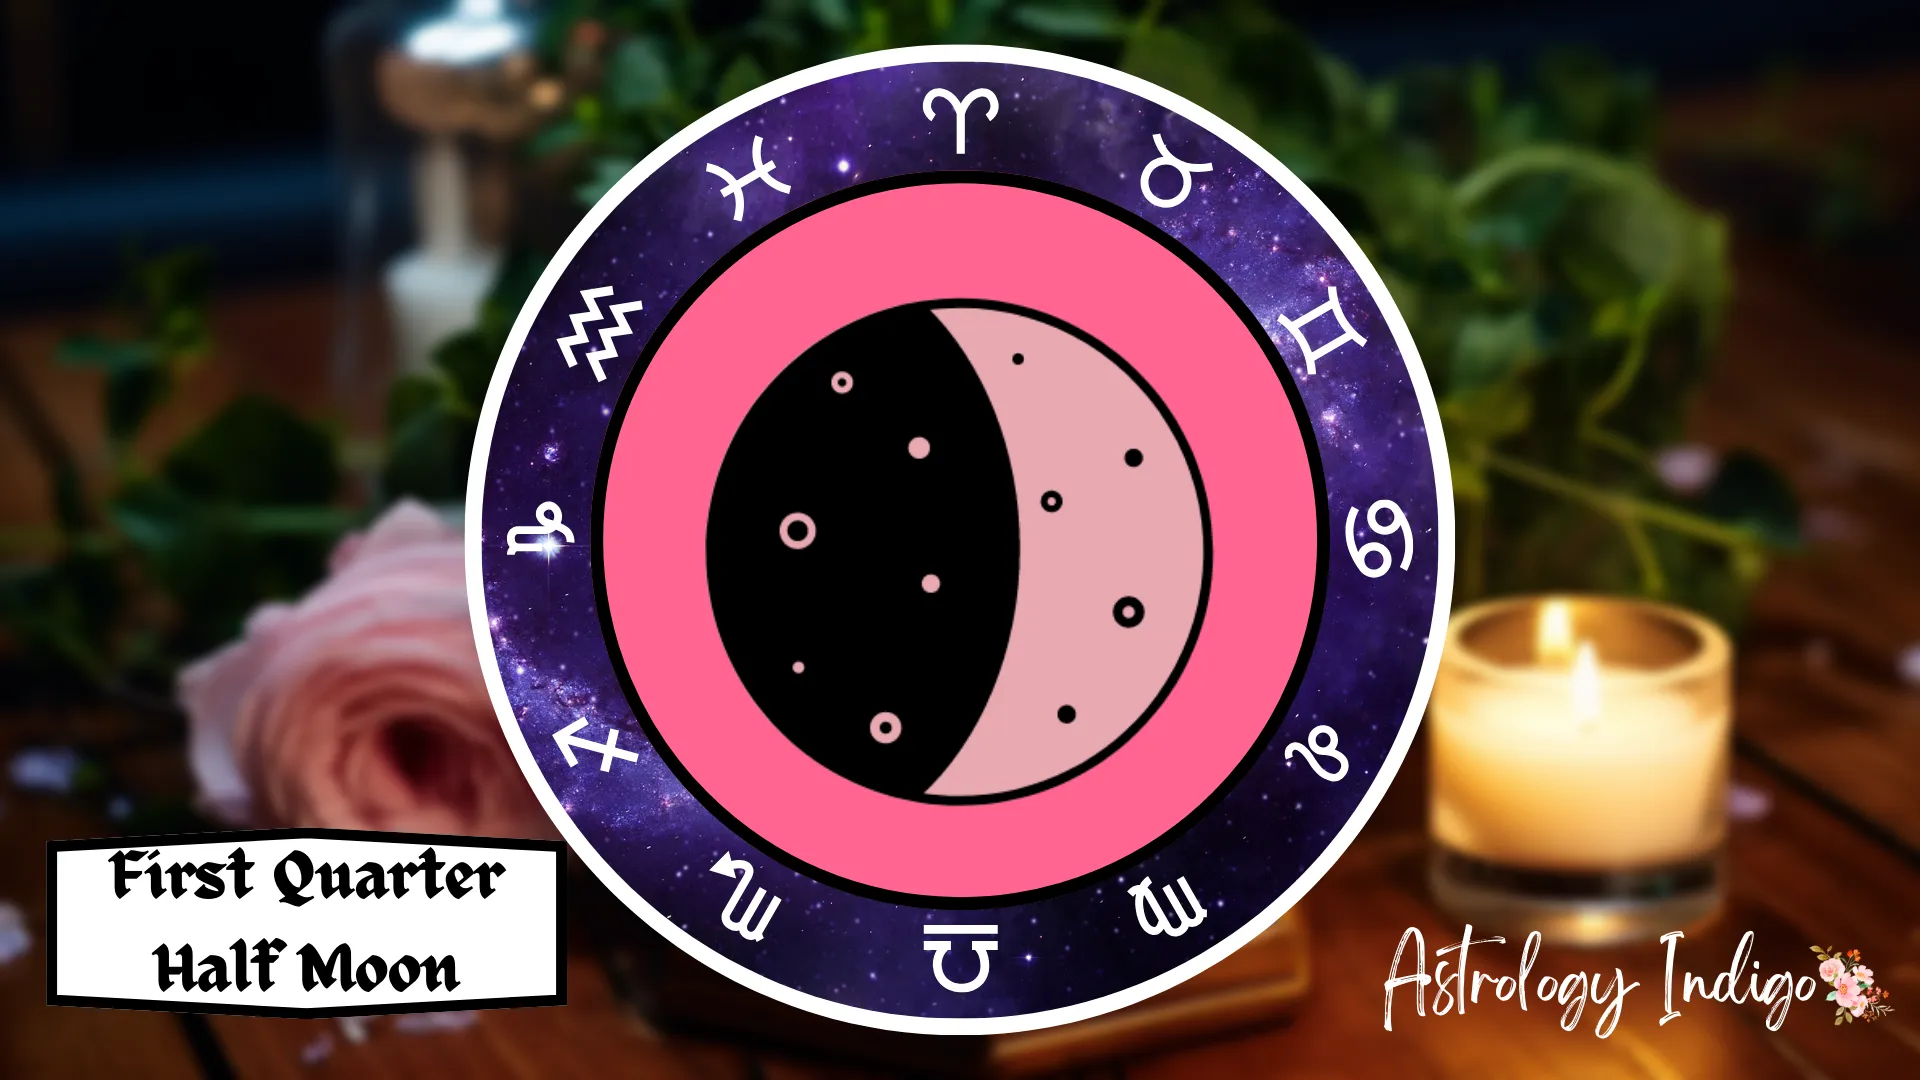 A symbol of a First Quarter Half Moon is surrounded by the Zodiac signs on a table with flowers and candles